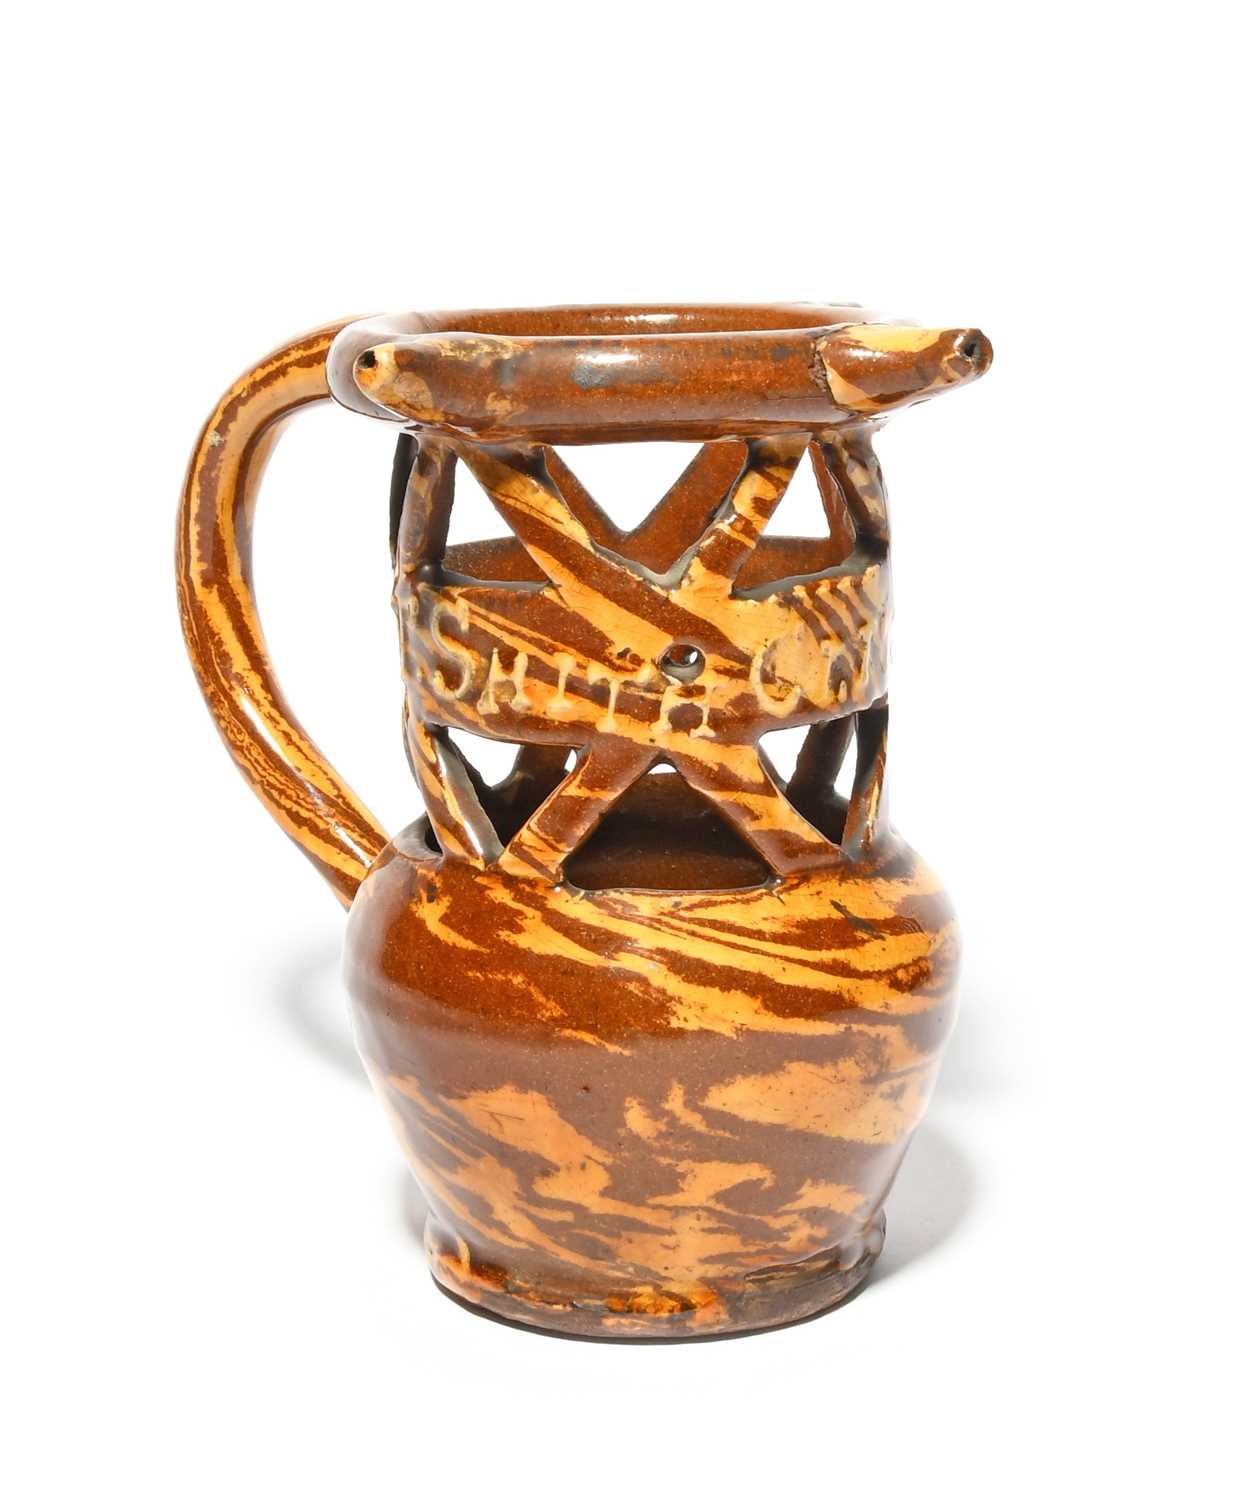 A slipware puzzle jug of agateware type, dated 1901, decorated in cream and treacle slip to simulate